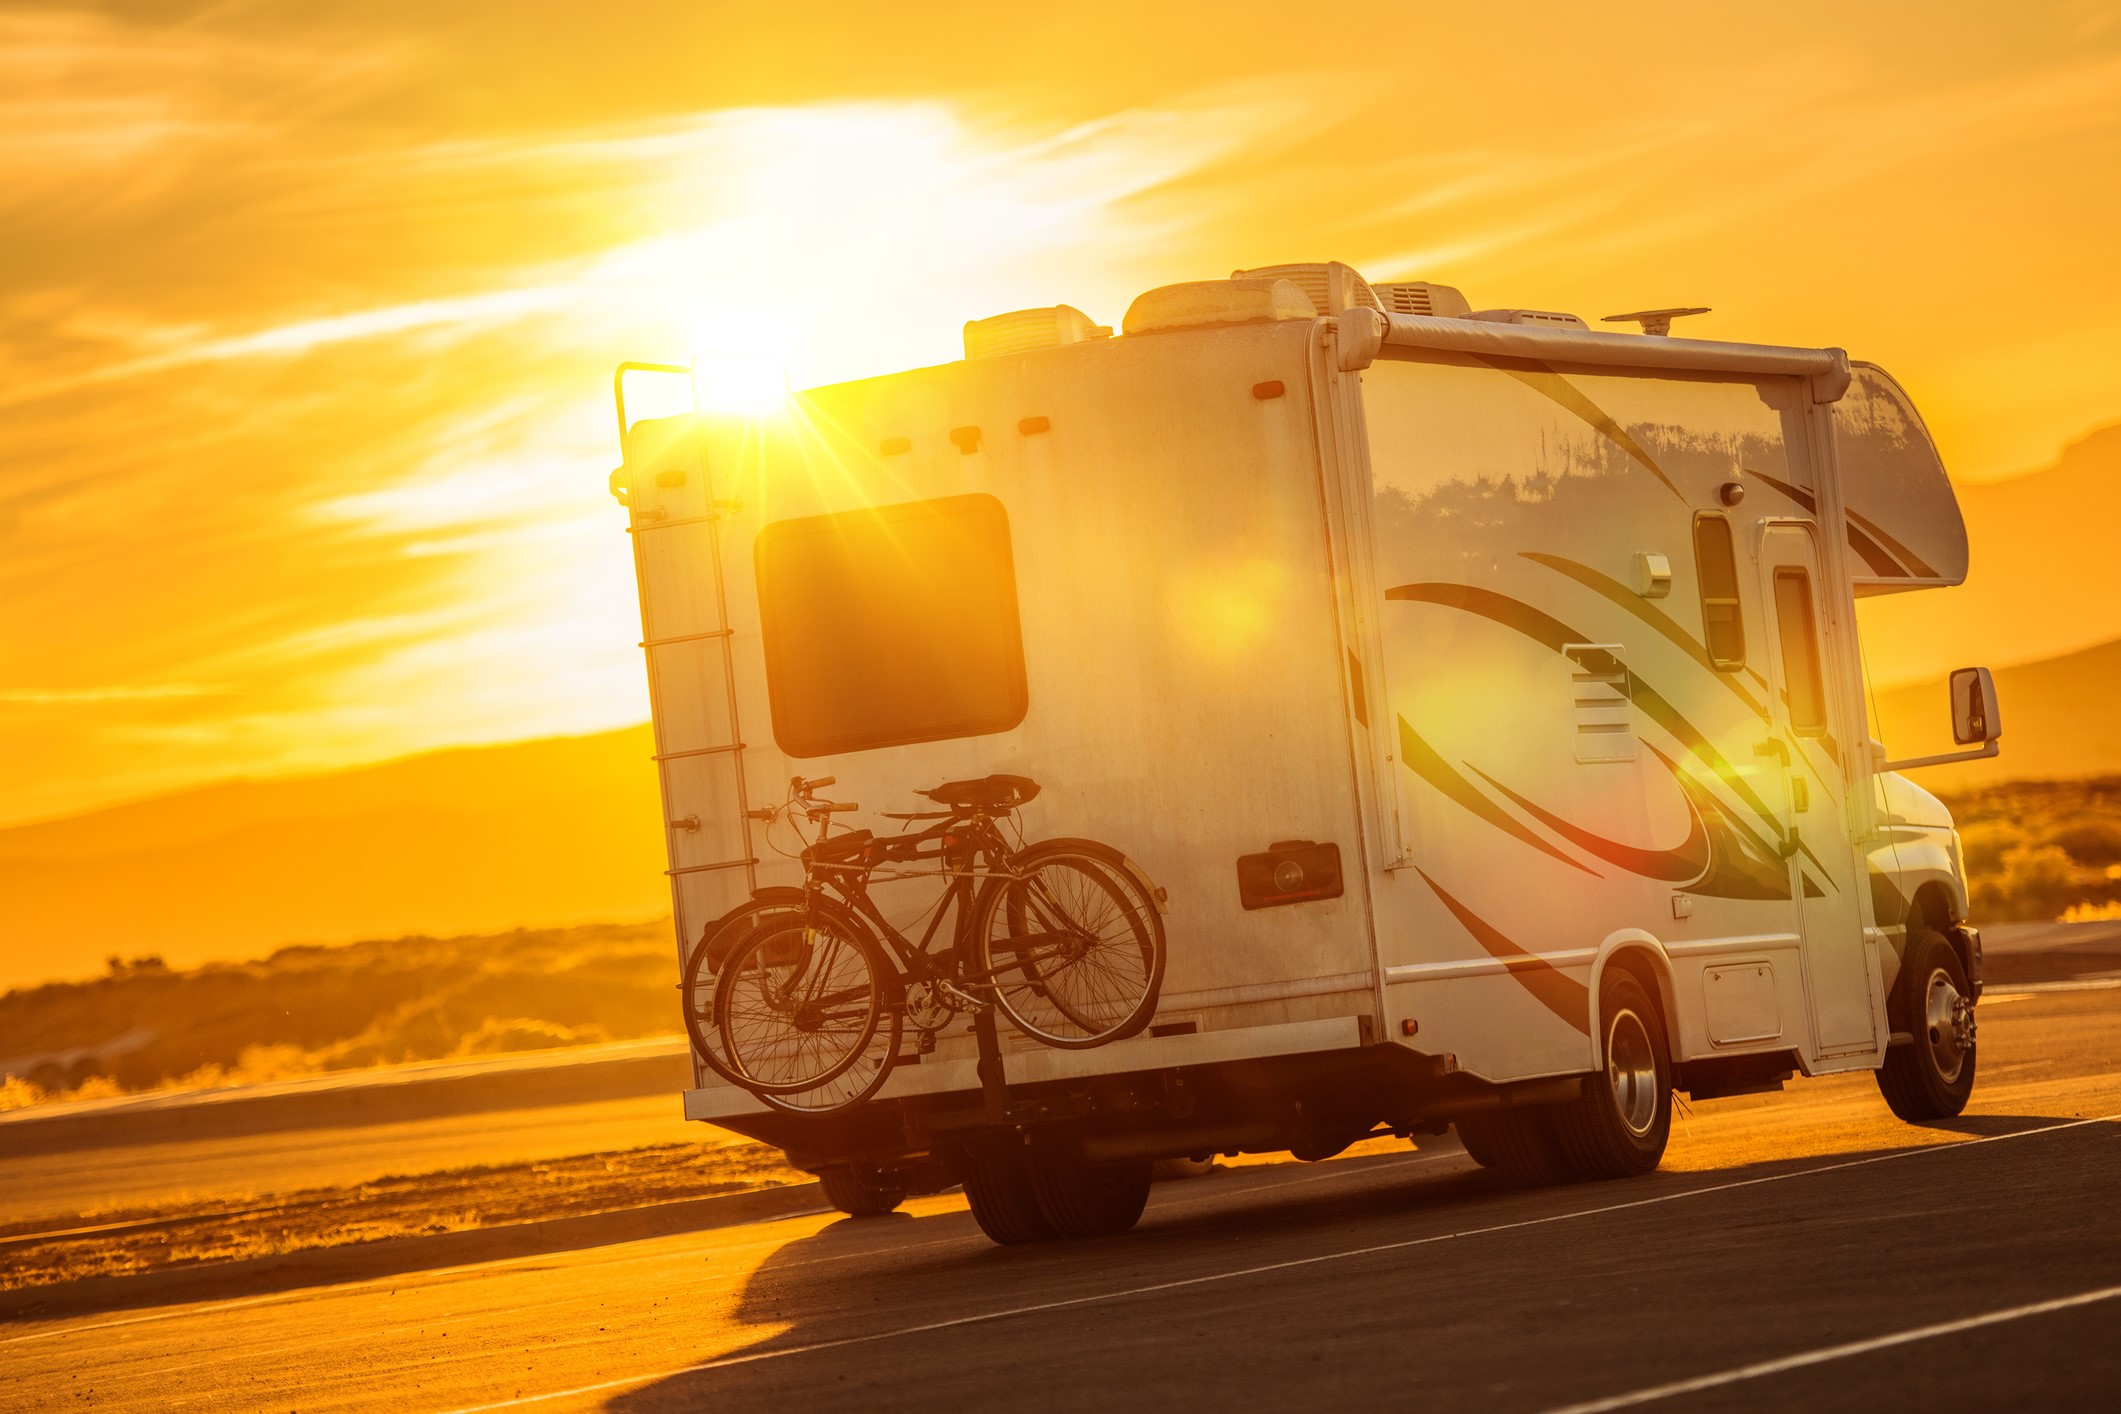 Class C Motorhome Pros and Cons